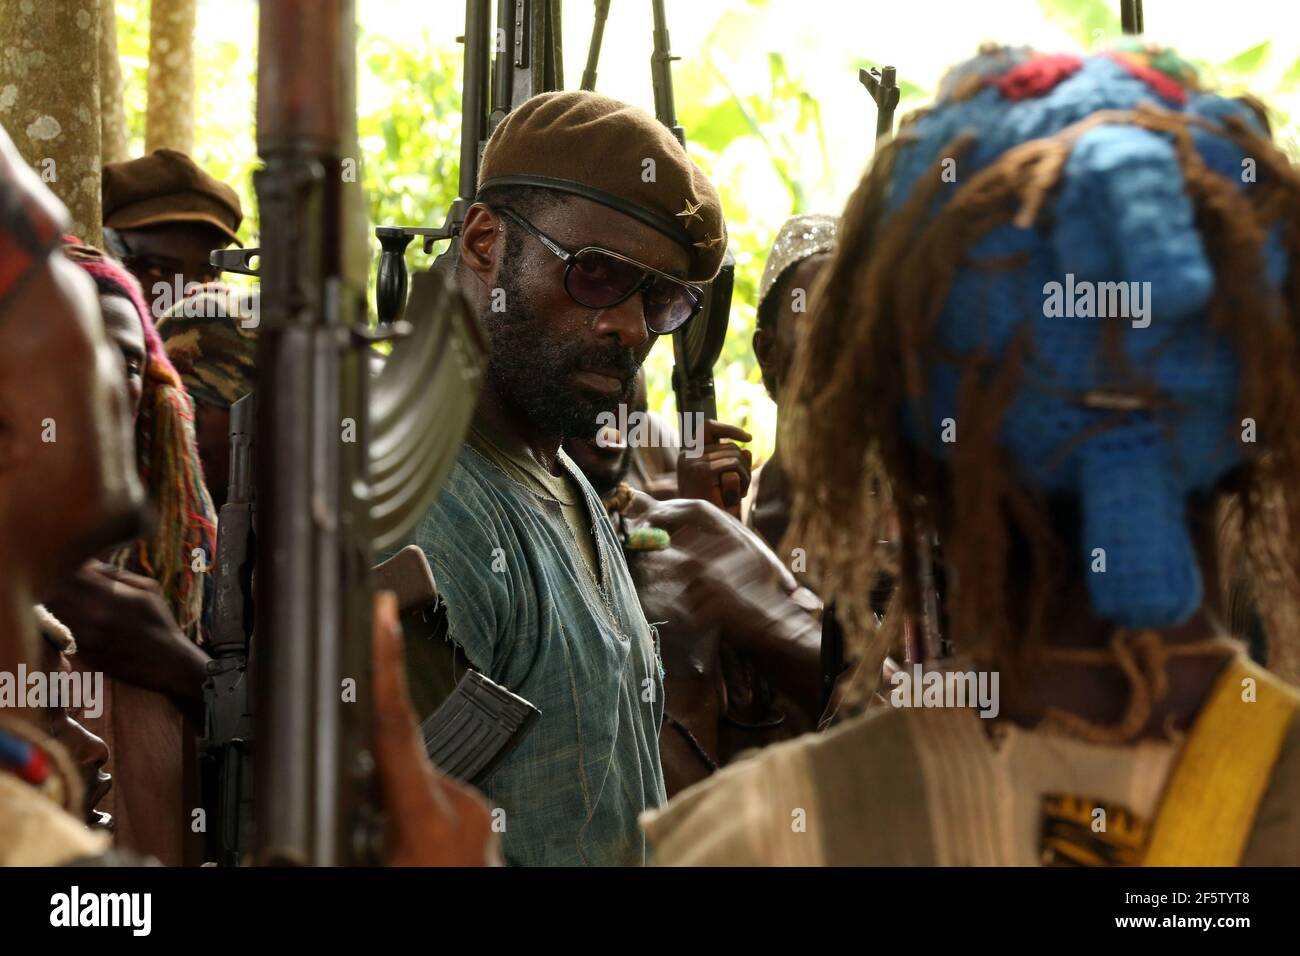 IDRIS ELBA In BEASTS OF NO NATION 2015 Directed By CARY JOJI